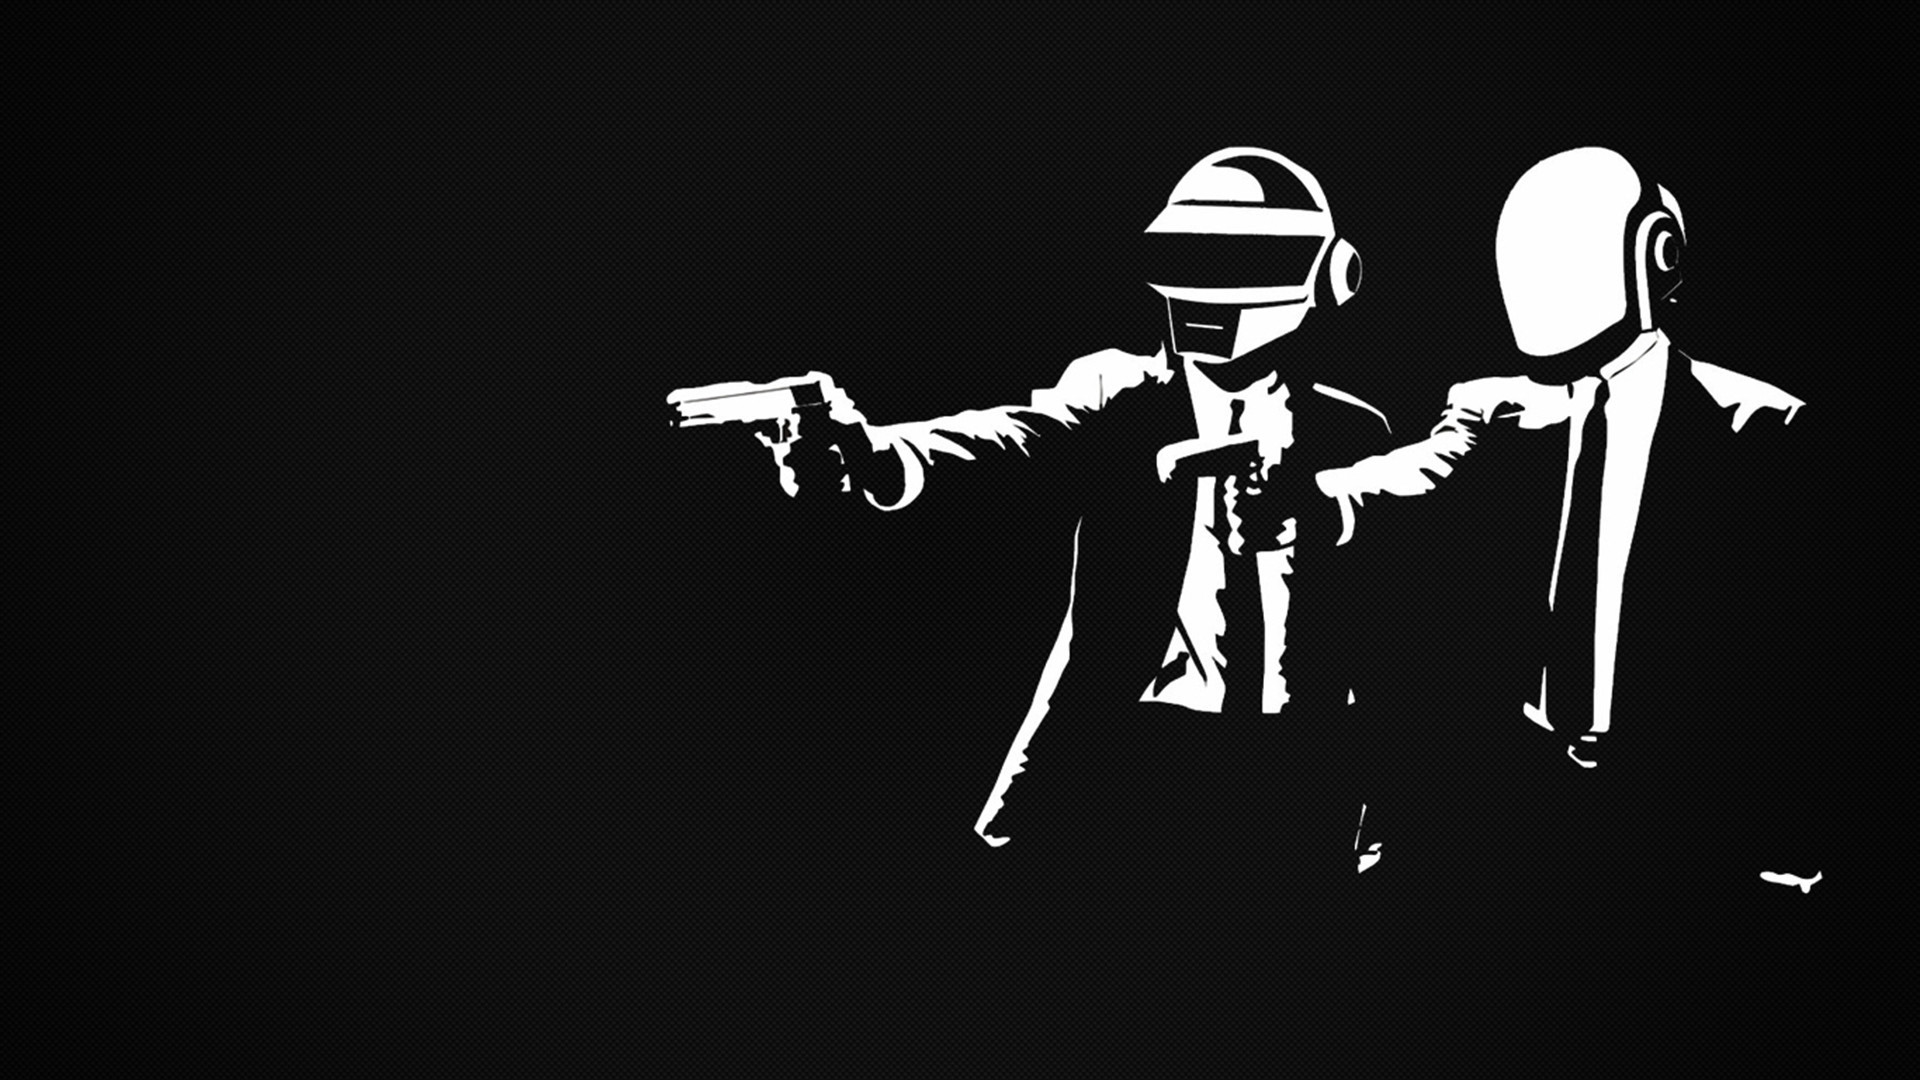 1920x1080 I made some changes to an old Daft Punk wallpaper.